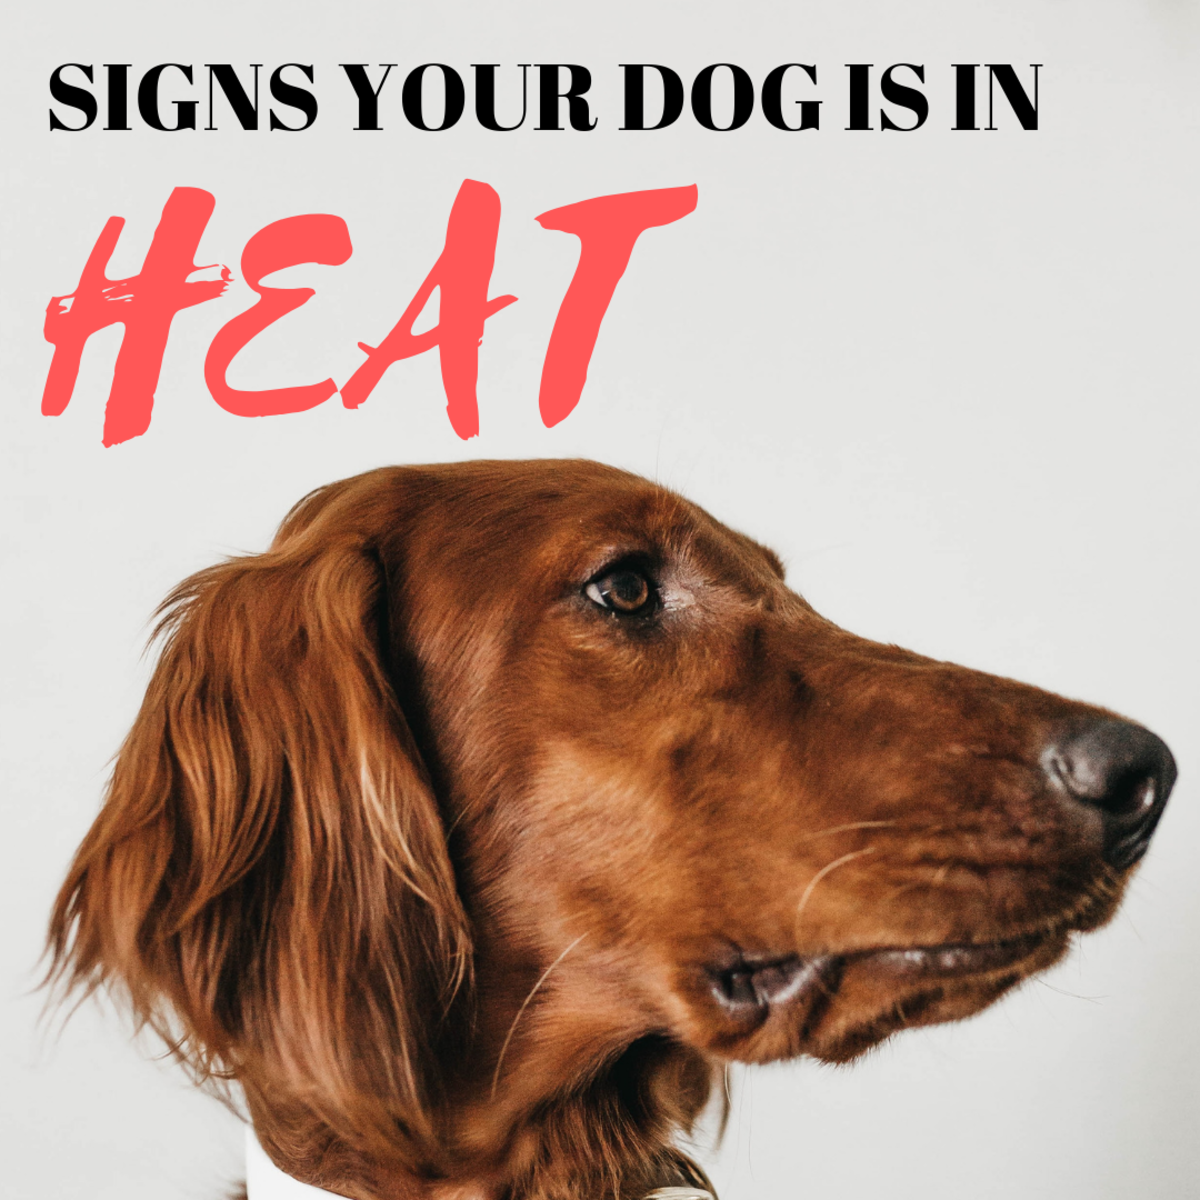 Signs Your Dog Is in Heat and Basic Pregnancy Prevention